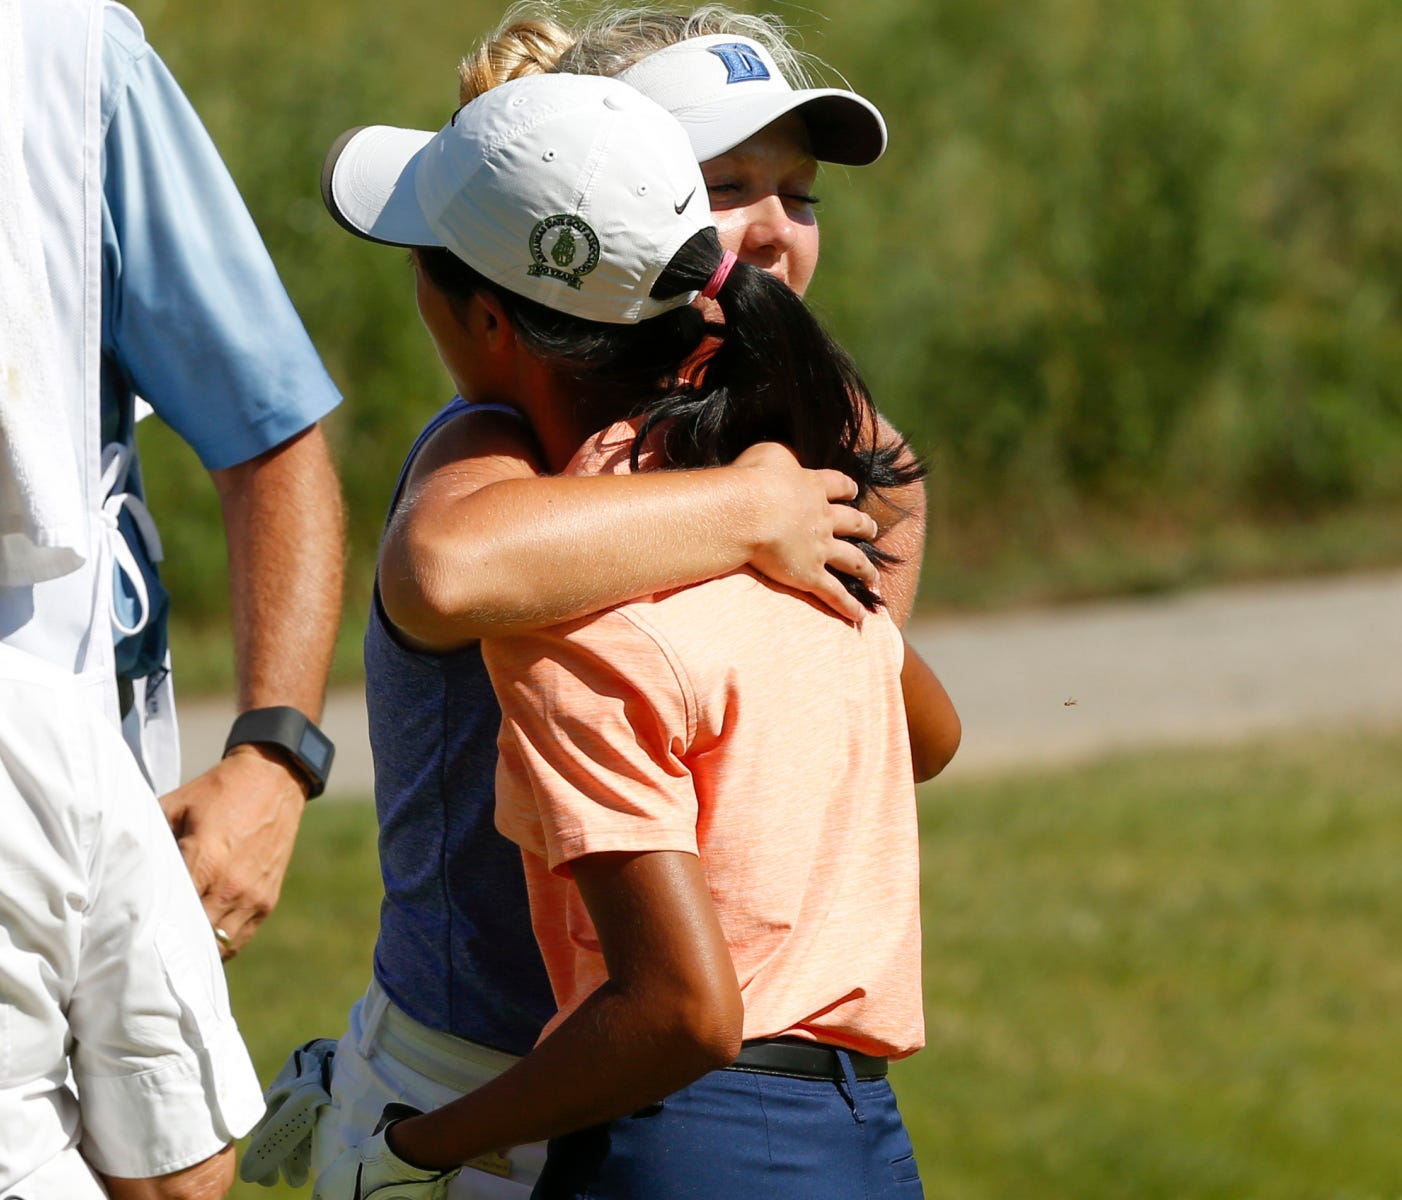 Elizabeth Moon and Erica Shepherd share a hug after Shepherd won the match on the first playoff hole during the semifinal round of match play at the 2017 U.S. Girls' Junior at Boone Valley Golf Club in Augusta, Mo. on Friday, July 28, 2017.  (Copyrig